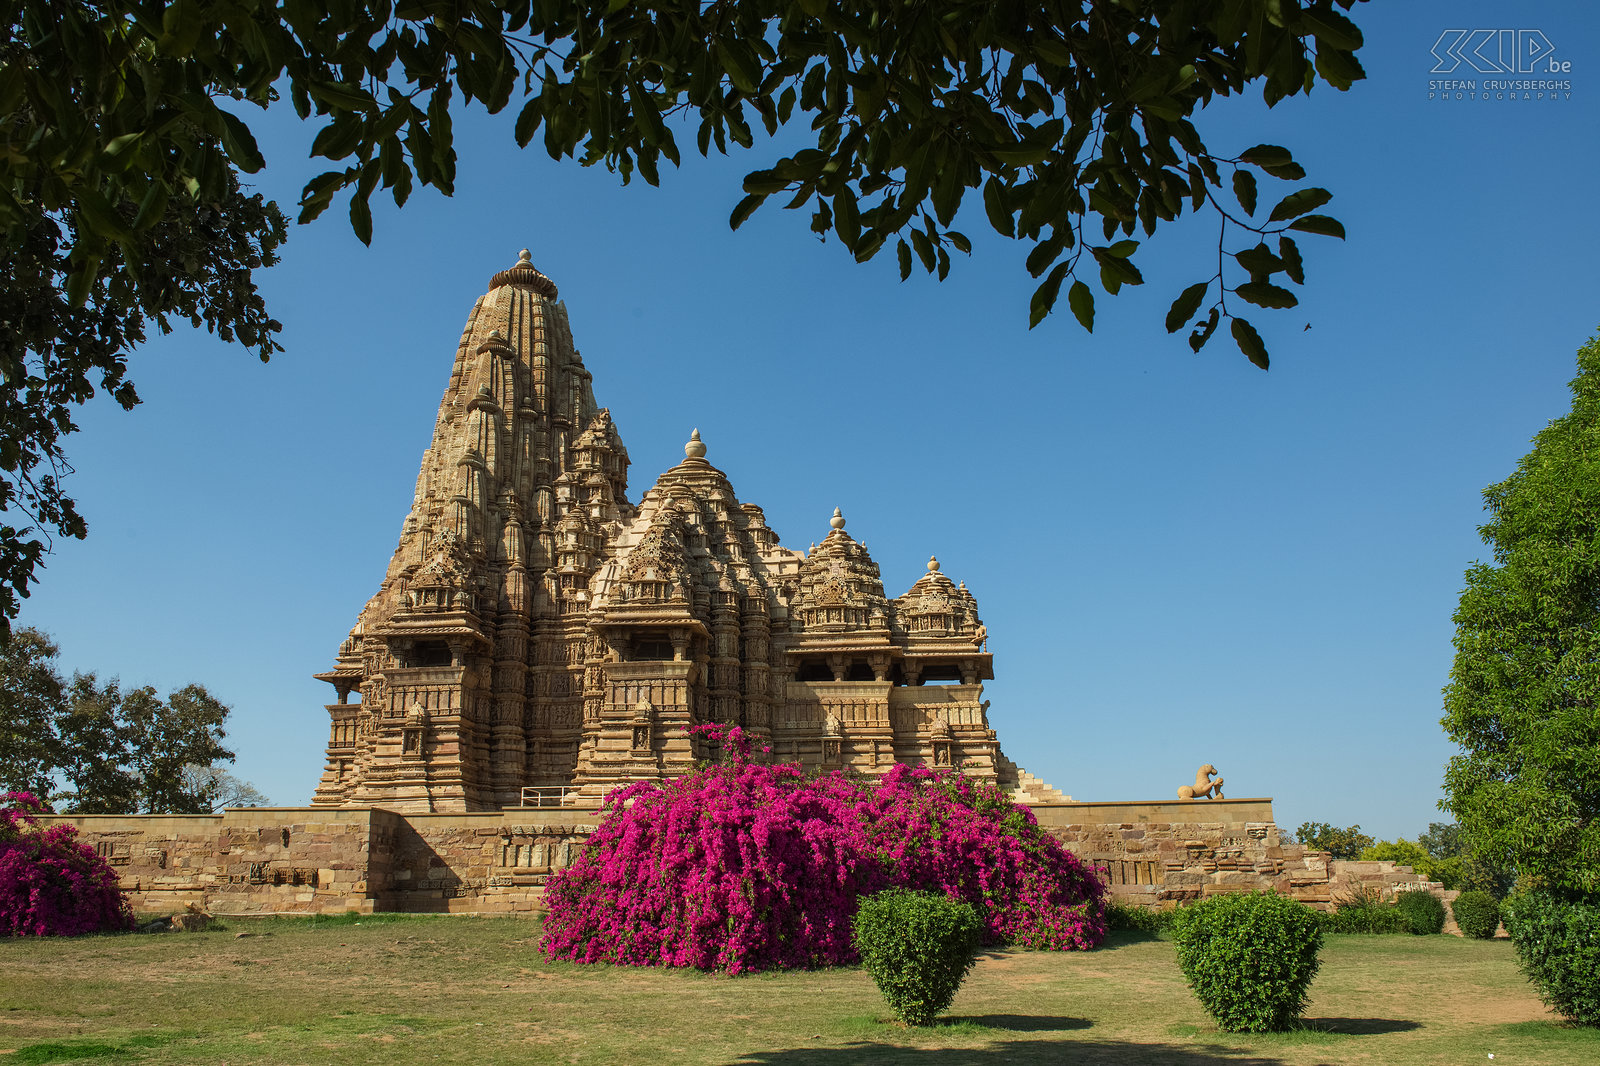 Khajuraho - Kandariya-Mahadev temple The town of Khajuraho is located in the state of Madhya Pradesh. Khajuraho is best known because of the many temples with erotic images and sculptures. Khajuraho was once the capital of the Chandella empire and the temples are now on the UNESCO World Heritage List. Stefan Cruysberghs